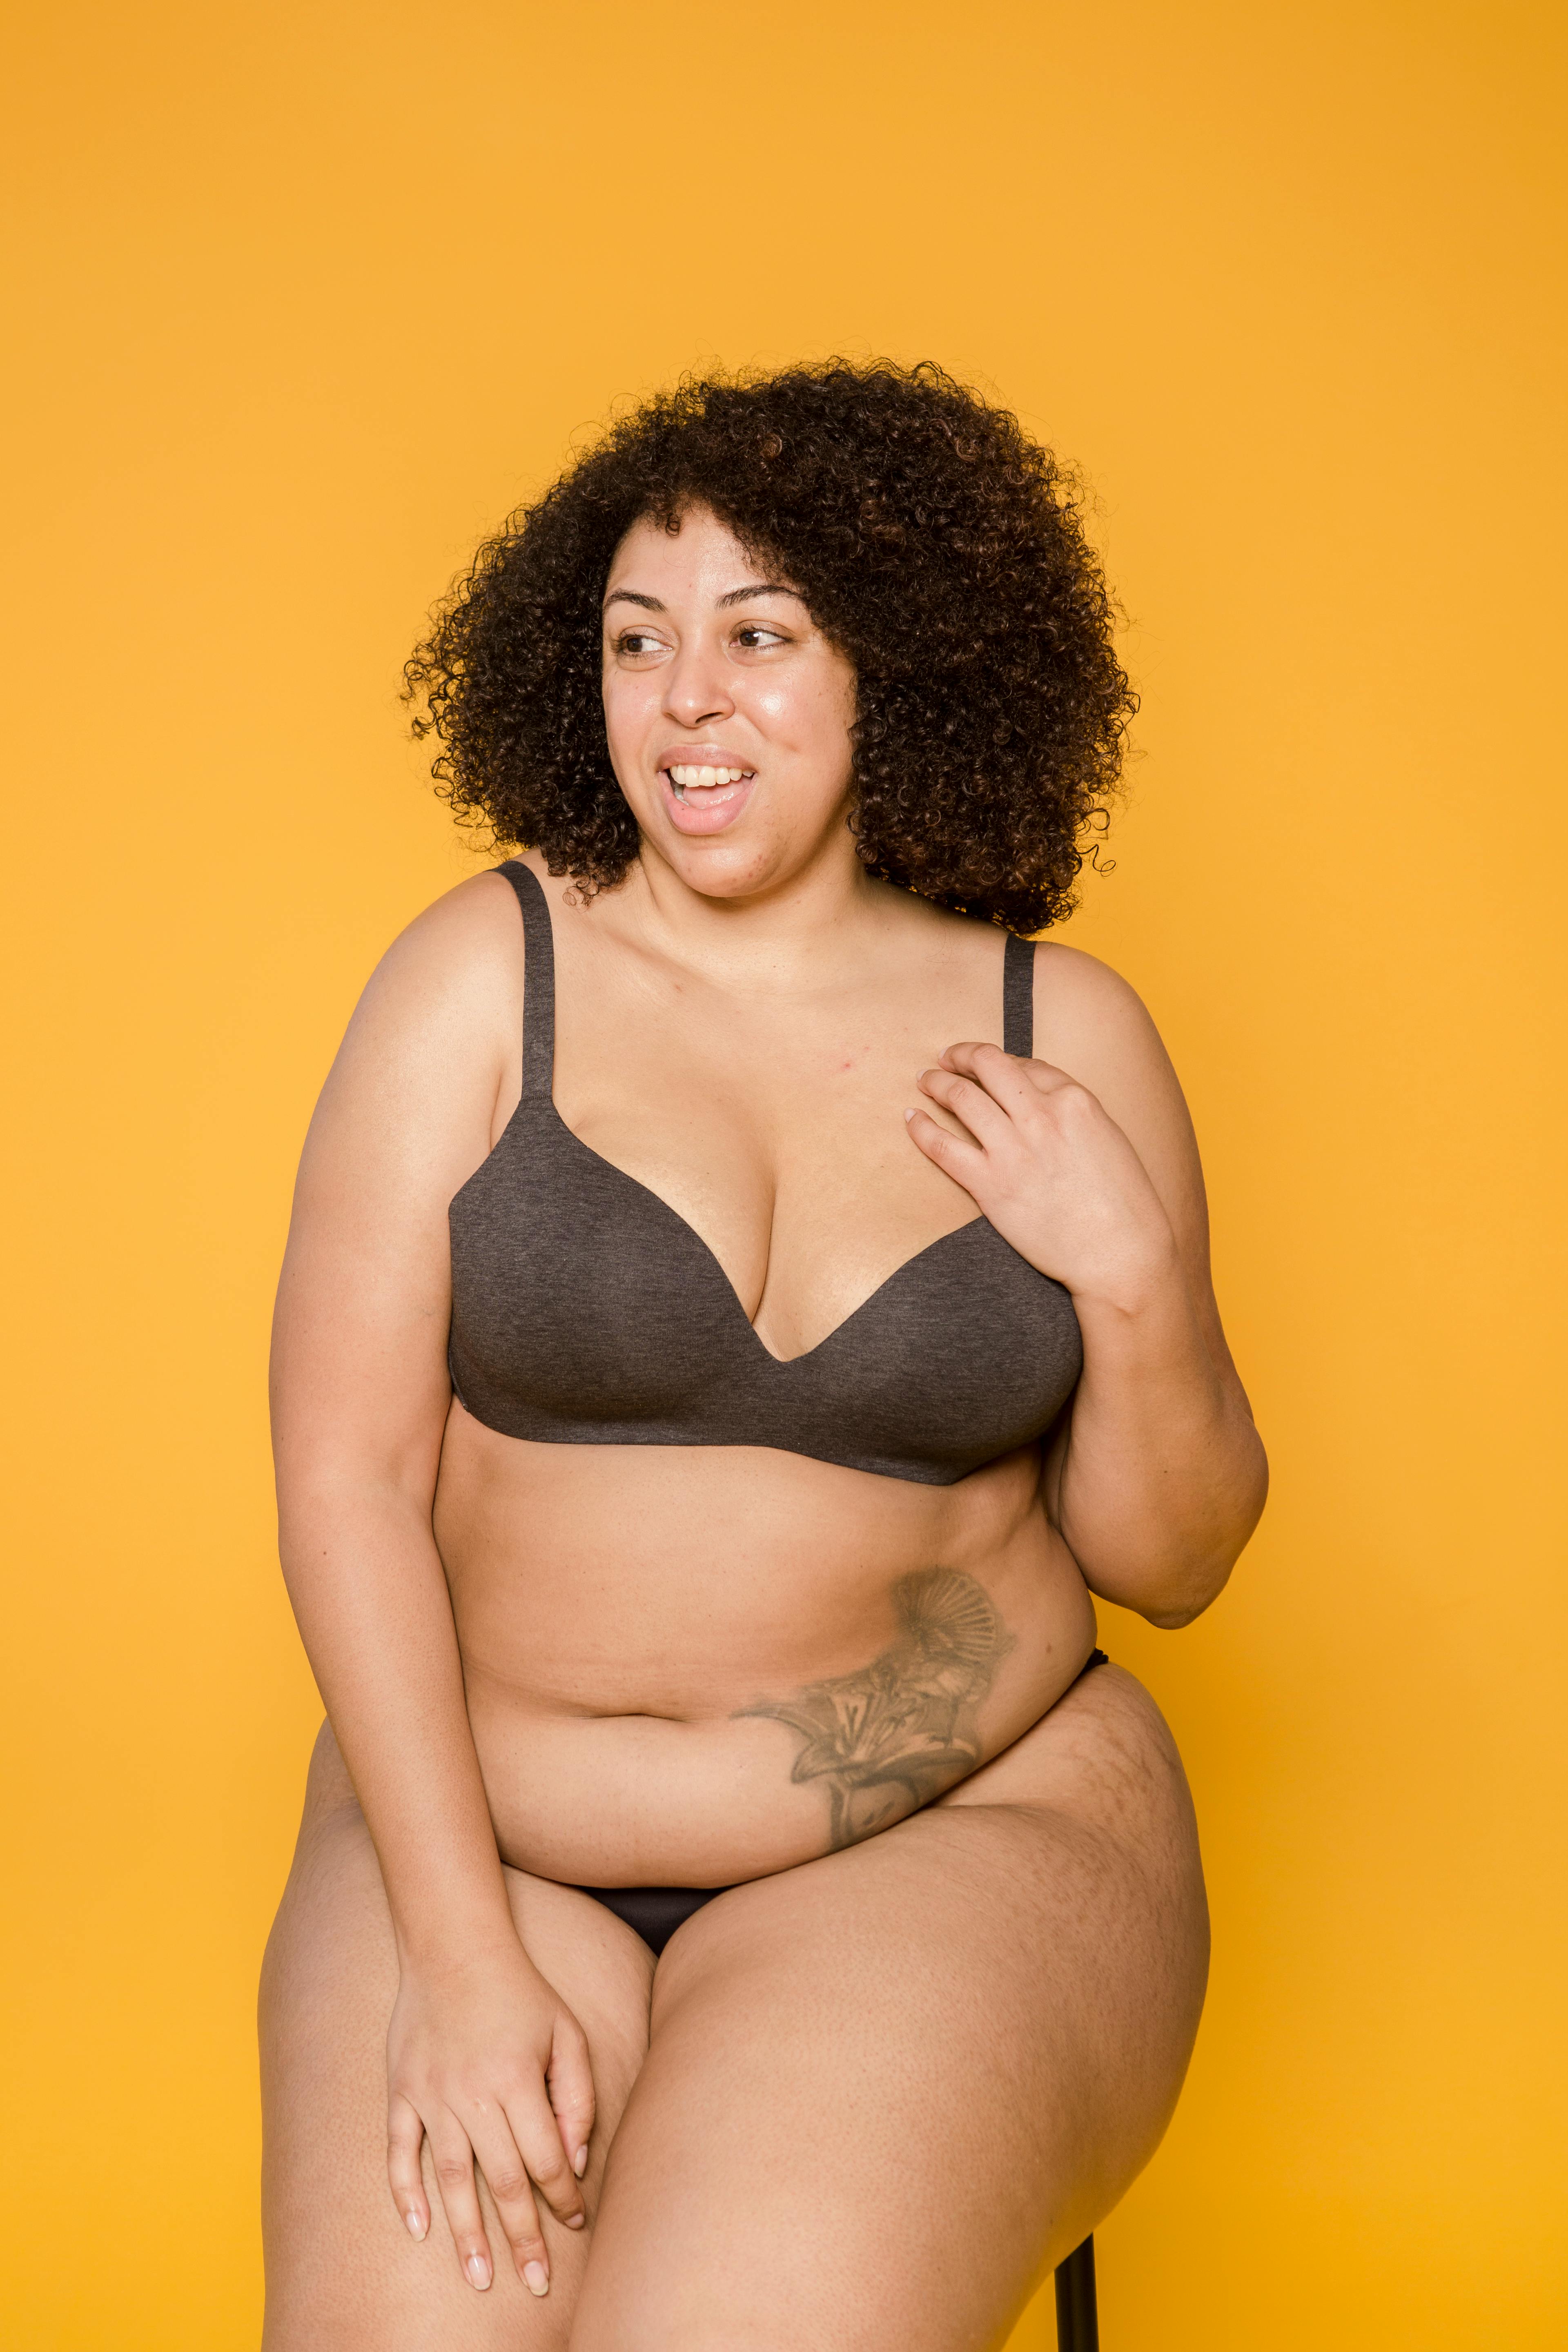 Beautiful plus size model wearing lingerie and piece fabric Stock Photo